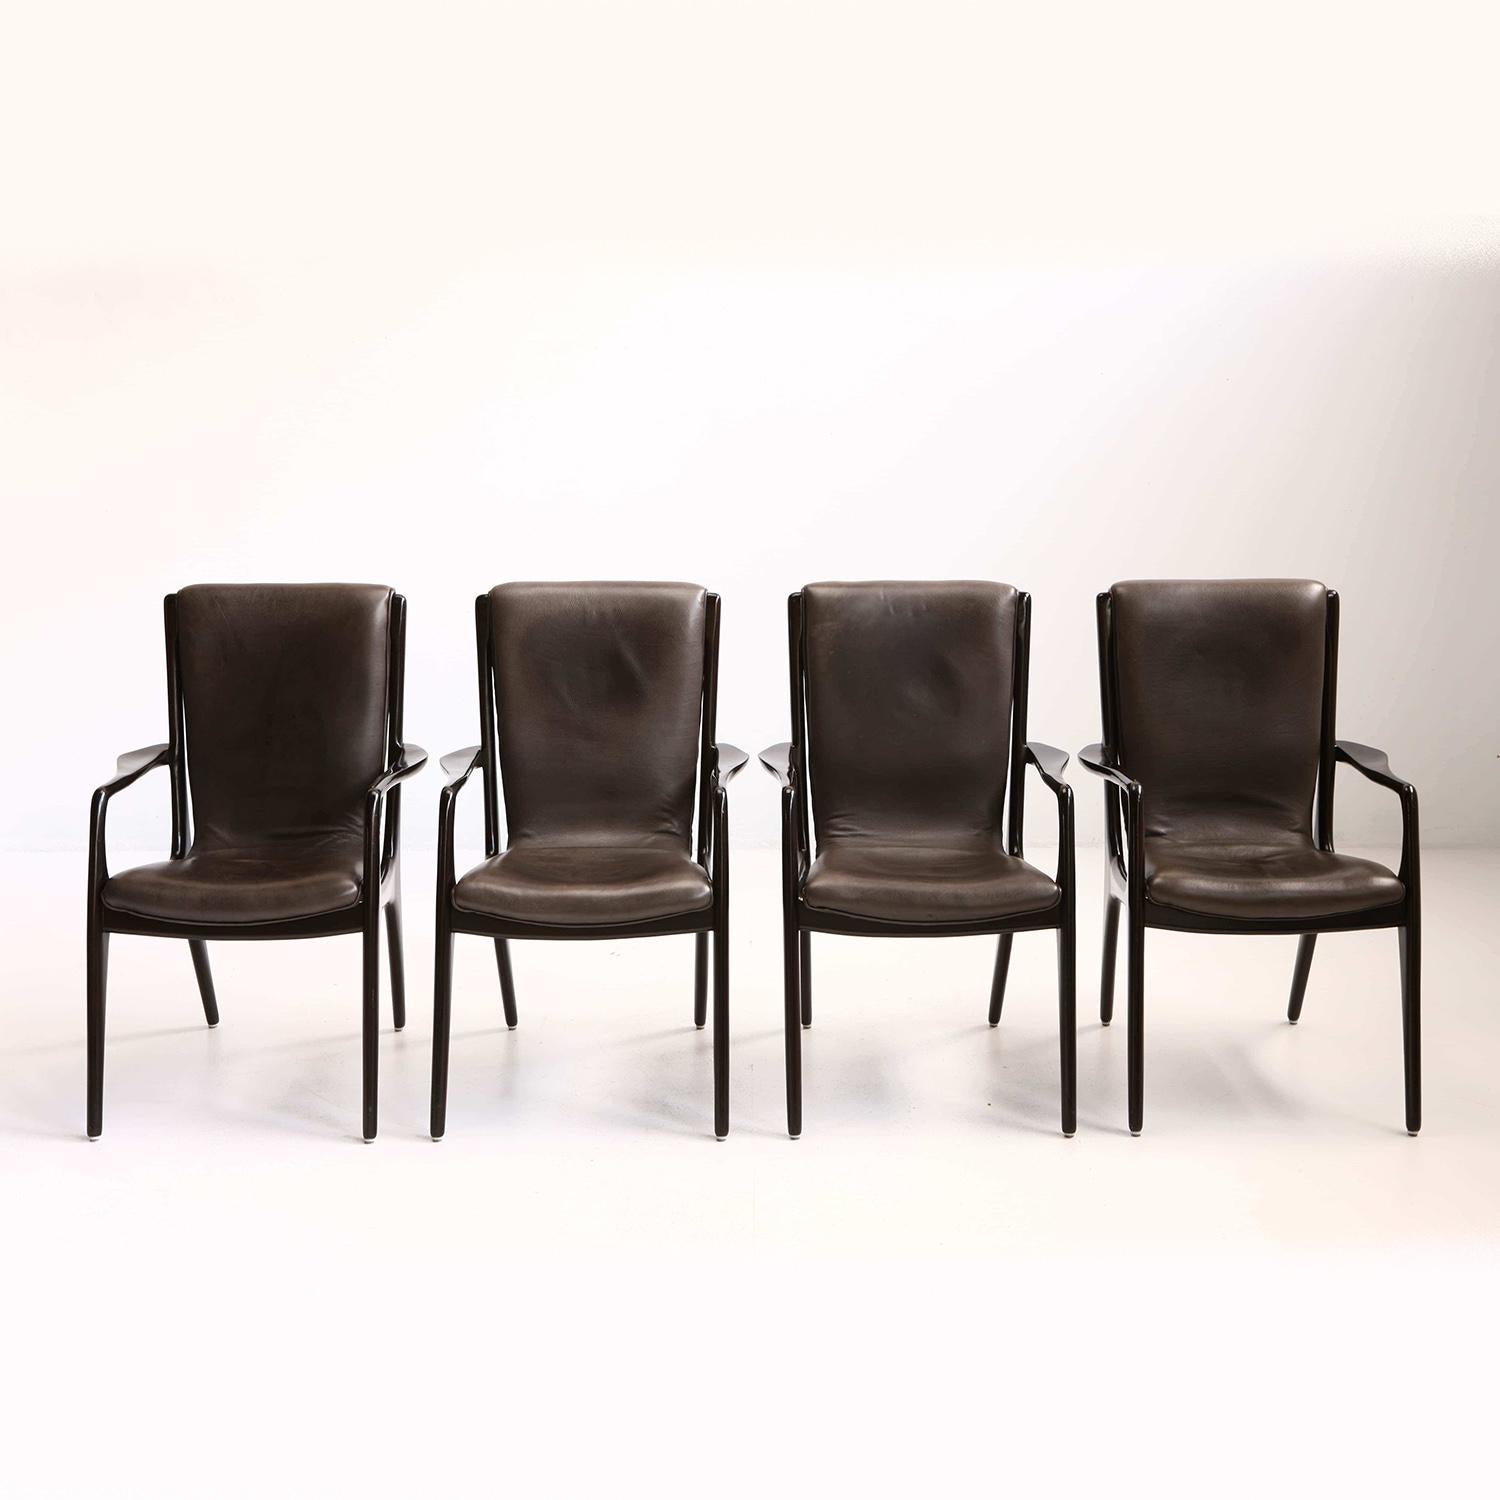 Set of 4 Midcentury Vladimir Kagan Sculpted Sling Dining Chairs Model VK 101A For Sale 4